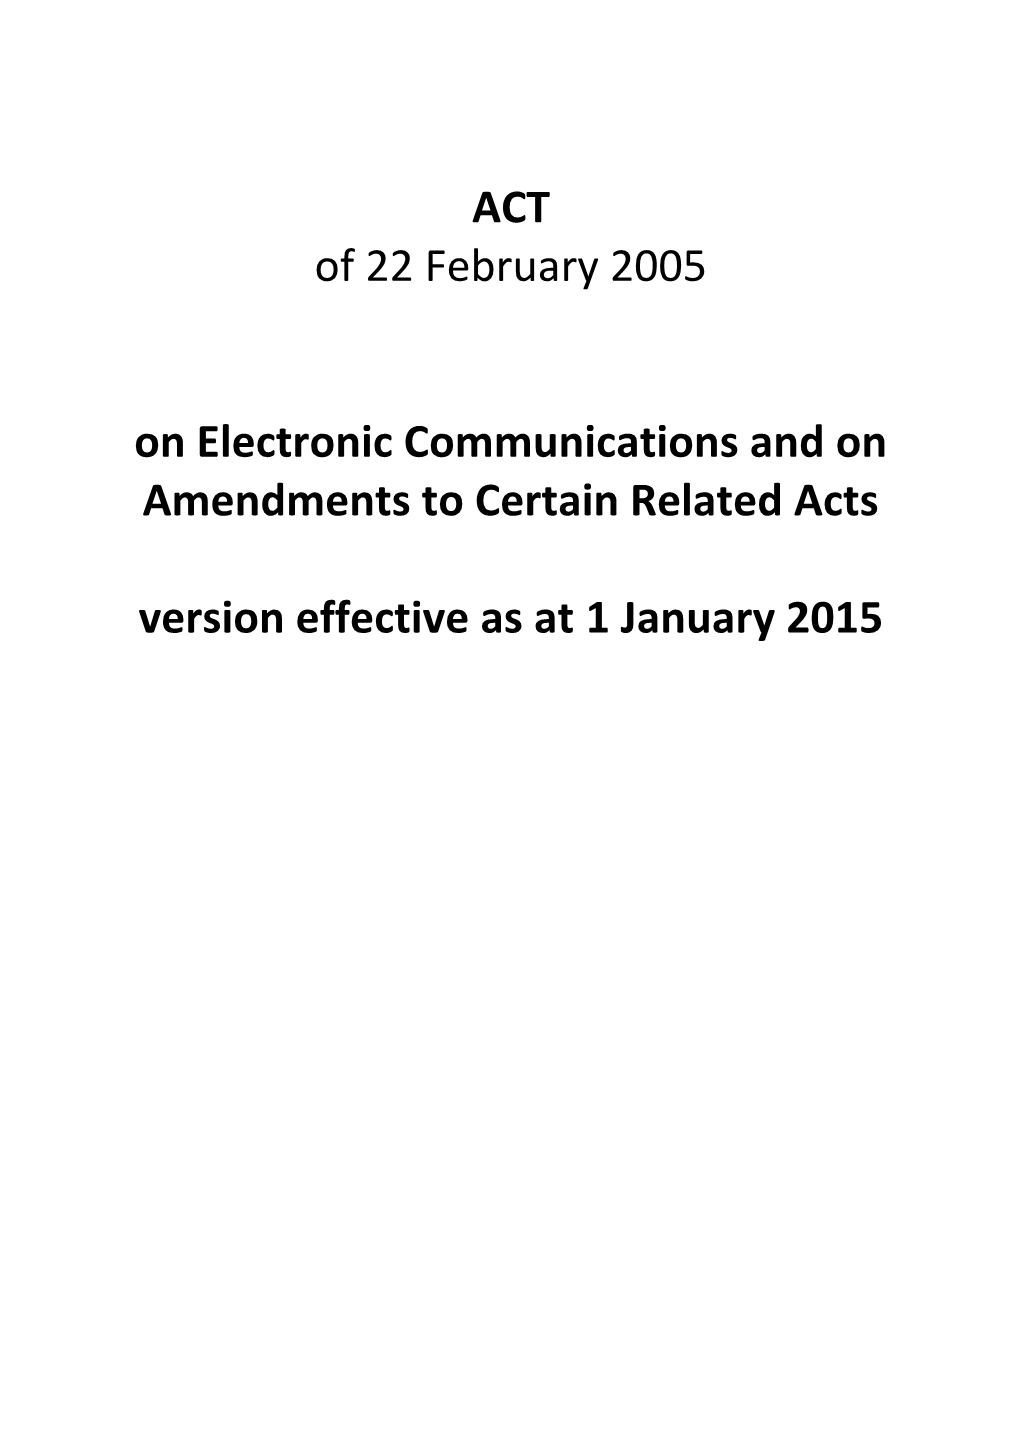 On Electronic Communications and on Amendments to Certain Related Acts